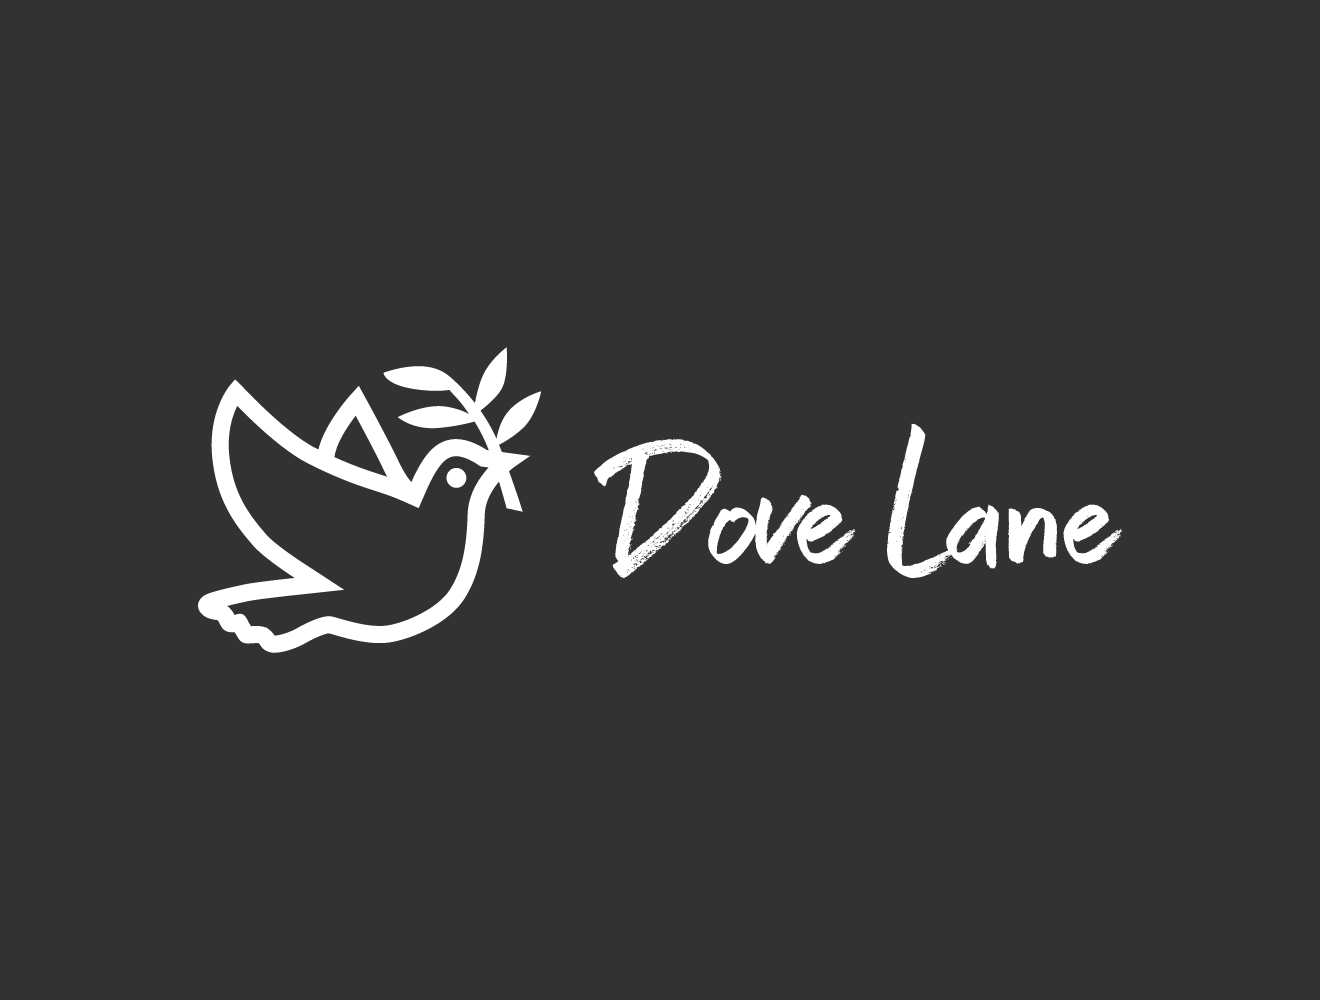 Notes From Dove Lane